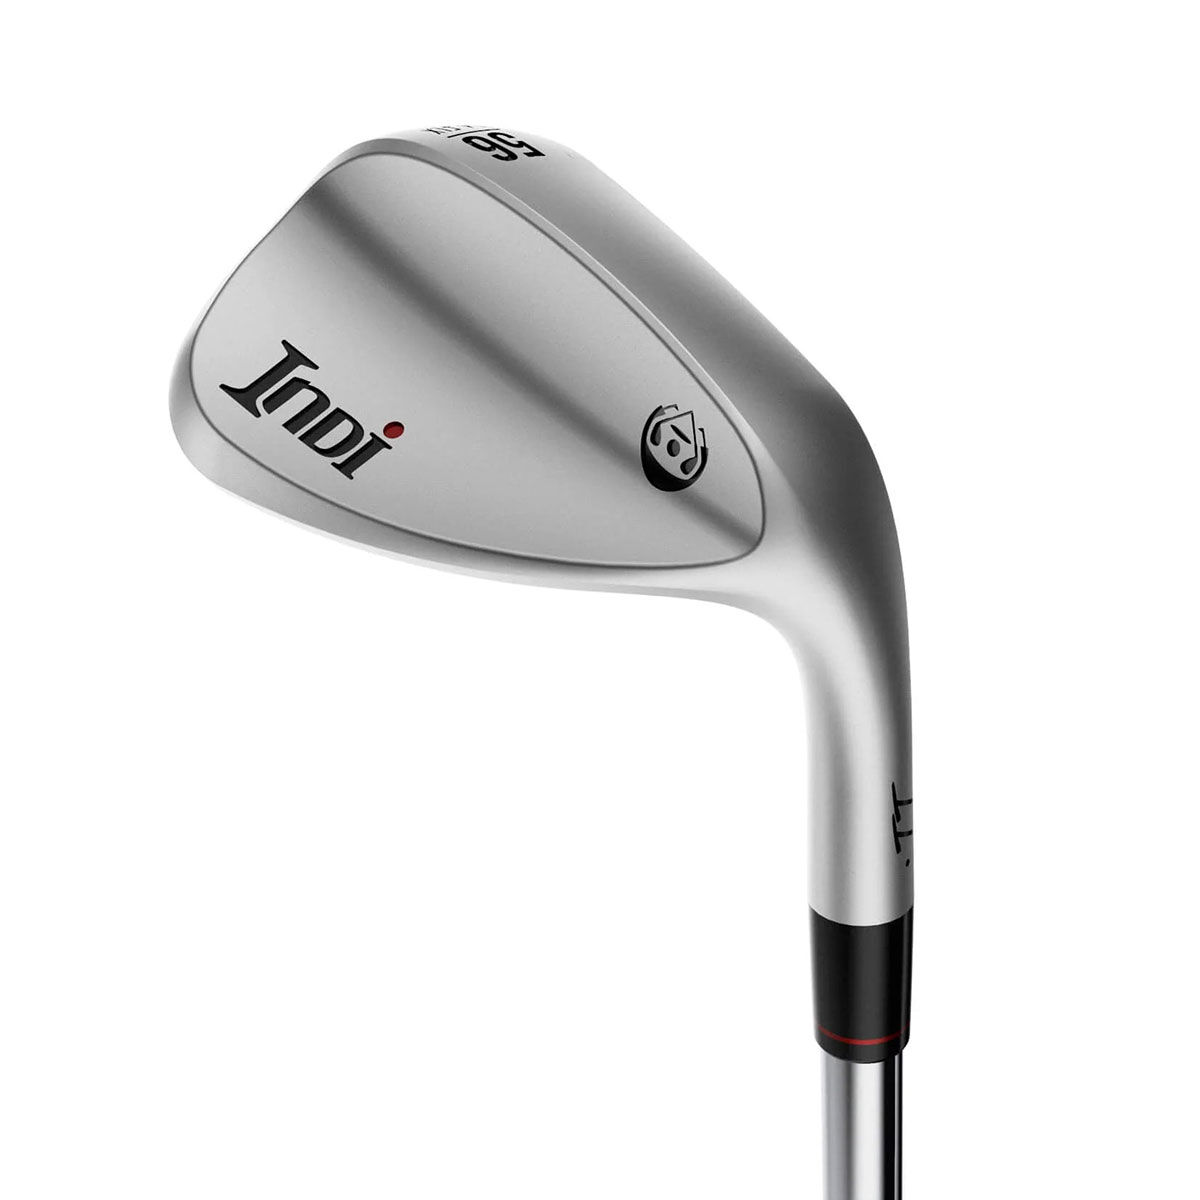 INDI FLX S Grind Steel Golf Wedge, Mens, Right hand, 56 flx grind, Steel | American Golf von Indi Golf